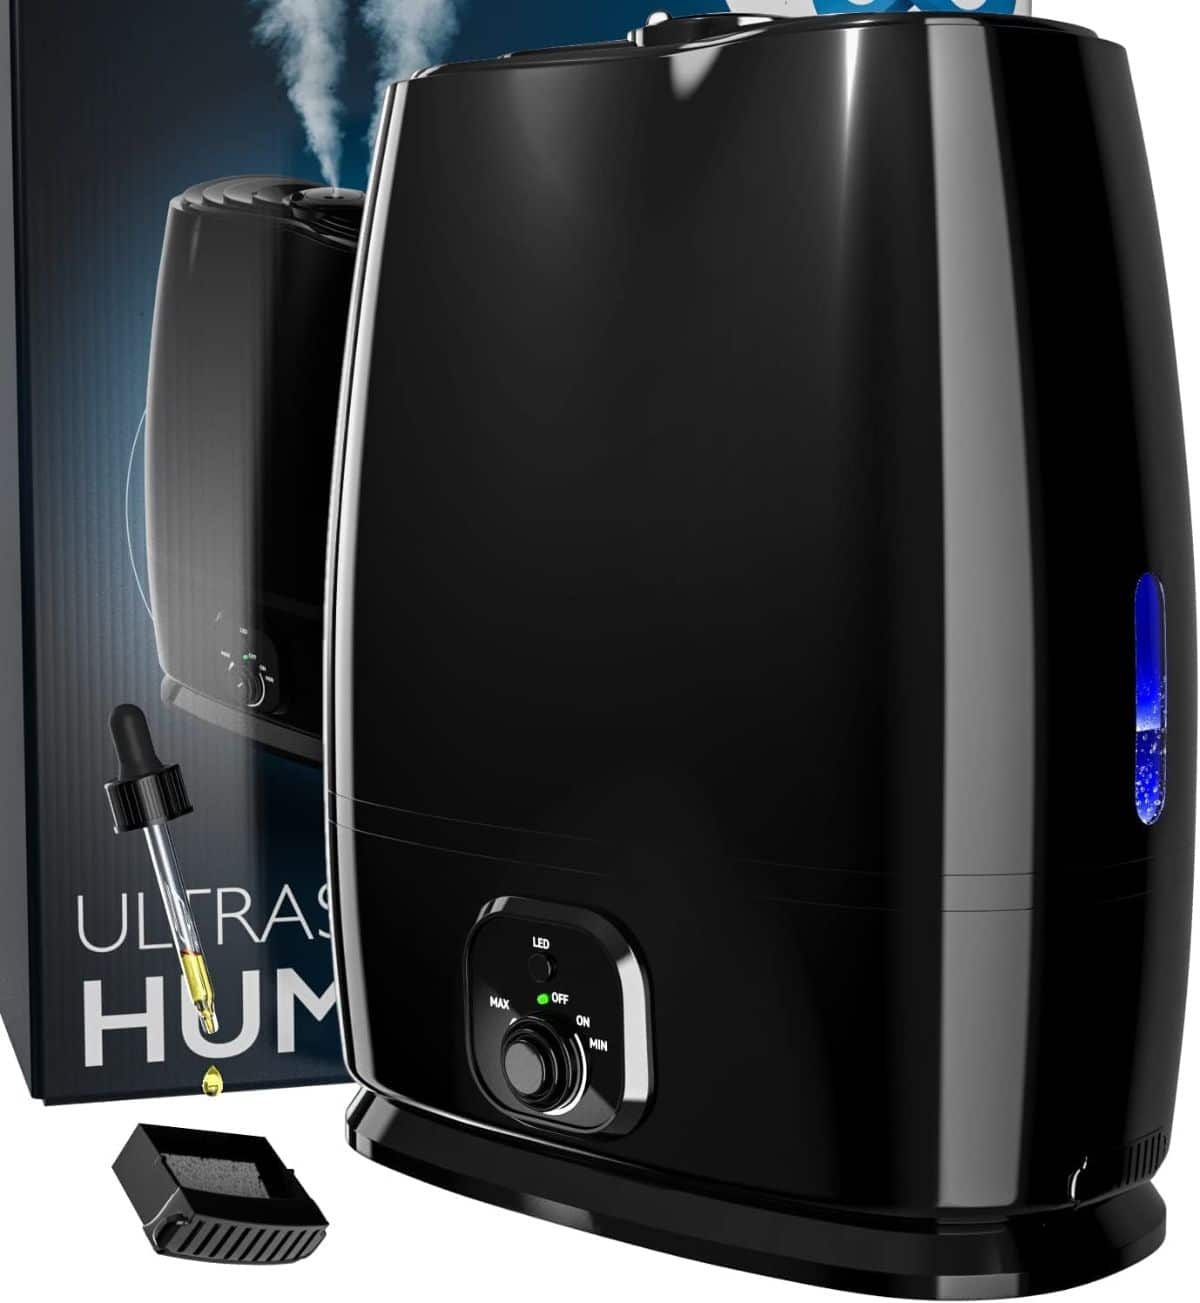 Ultrasonic room humidifier that runs for up to 50 hours without refilling